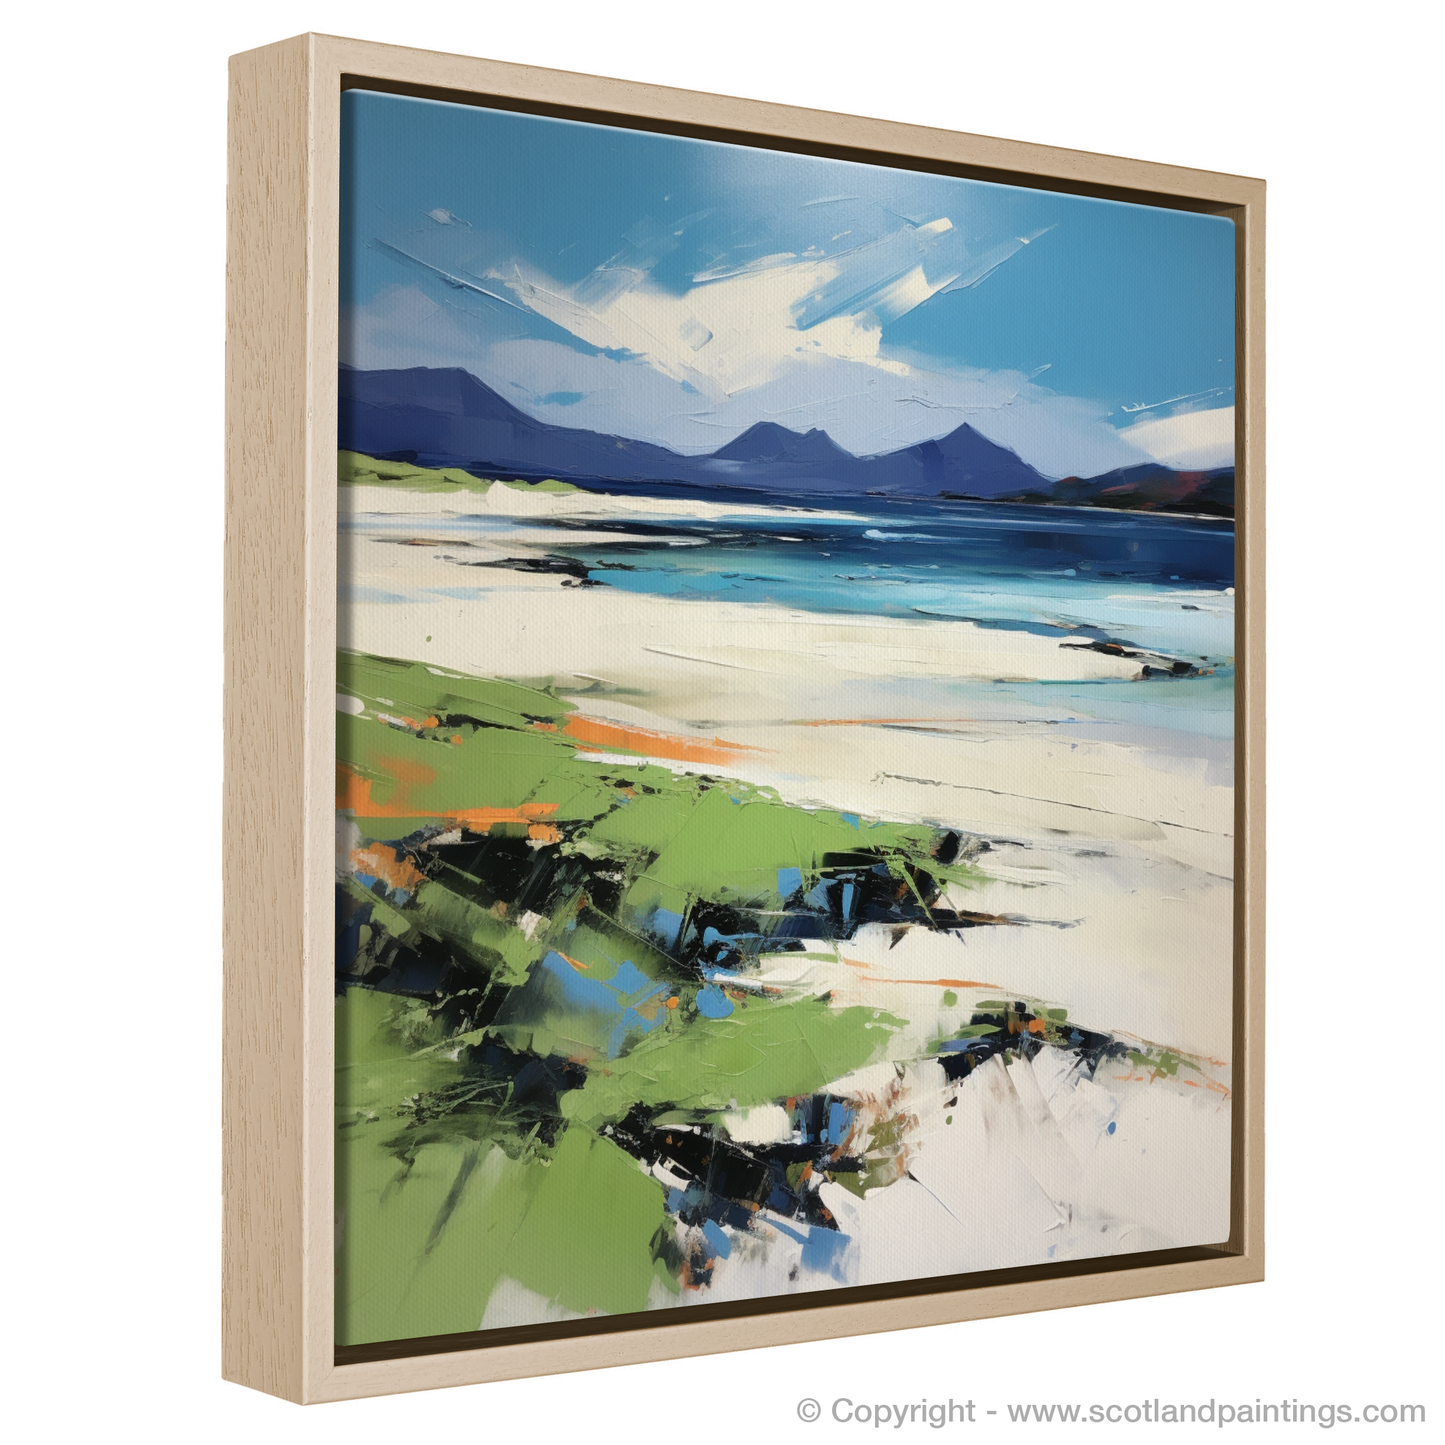 Painting and Art Print of Mellon Udrigle Beach, Wester Ross in summer entitled "Mellon Udrigle Beach Rhapsody: A Wester Ross Summer Expression".